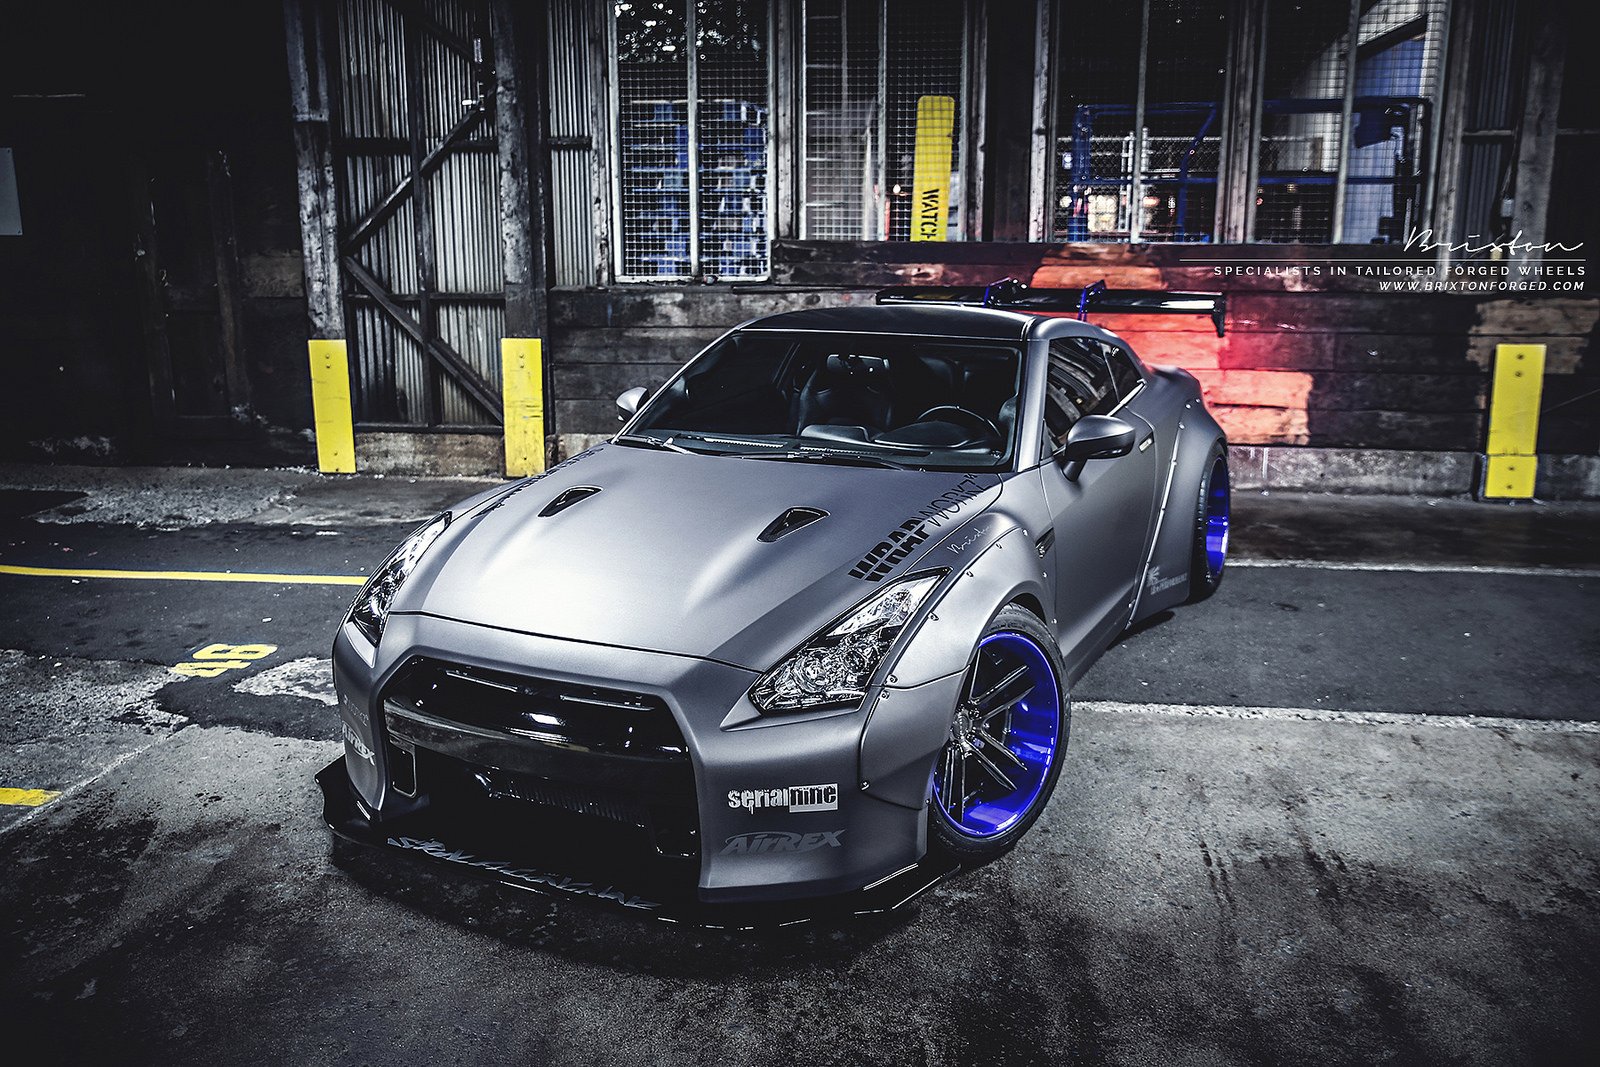 brixton, Forged, Wheels, Liberty, Walk, Nissan, Gtr, Coupe, Cars Wallpaper HD / Desktop and Mobile Background